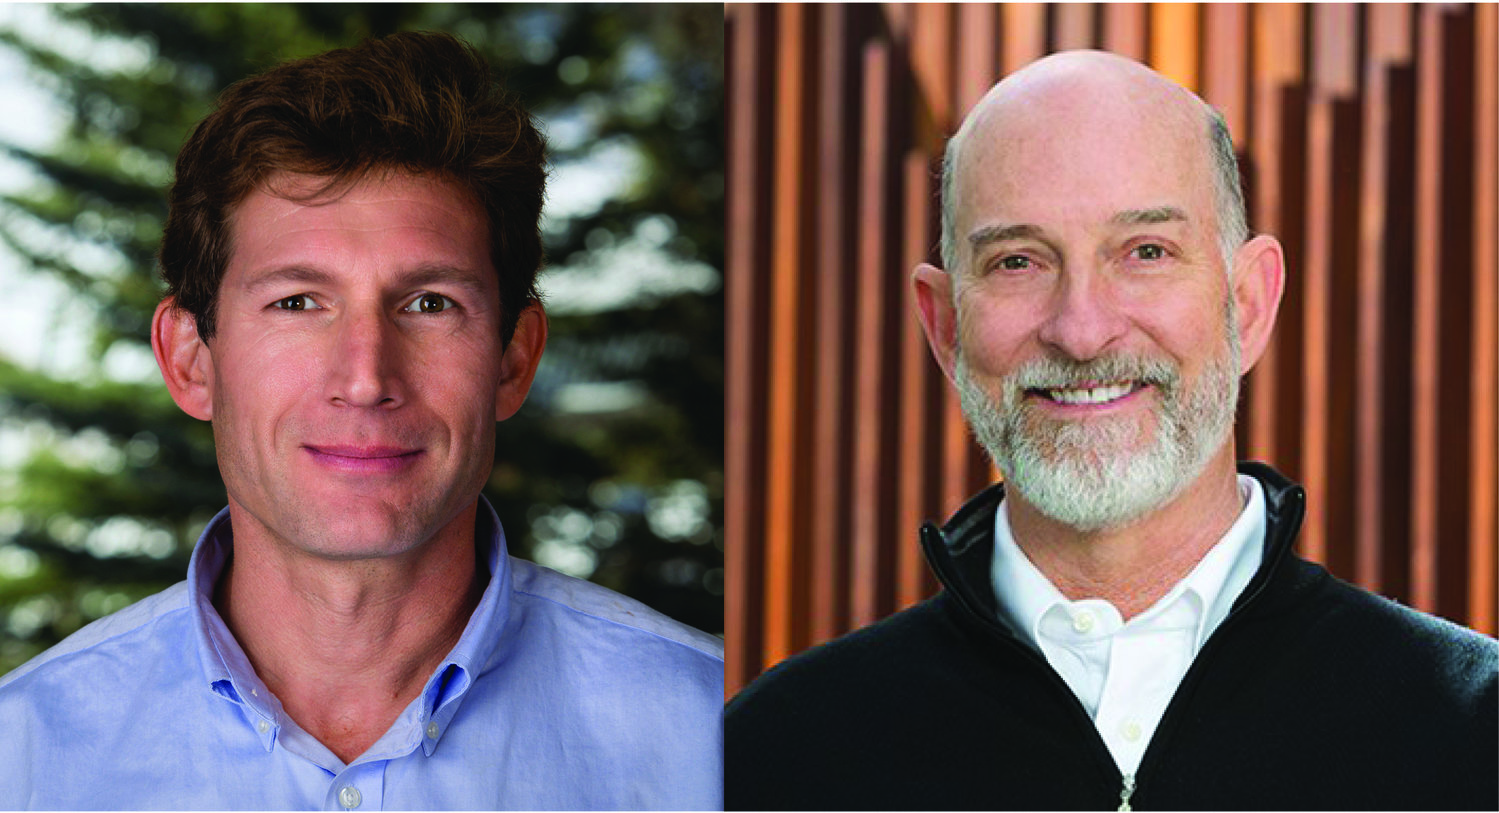 Auden Schendler, left, is senior vice president of sustainability at Aspen Skiing Company; Ted White is executive chair of Rocky Mountain Institute.